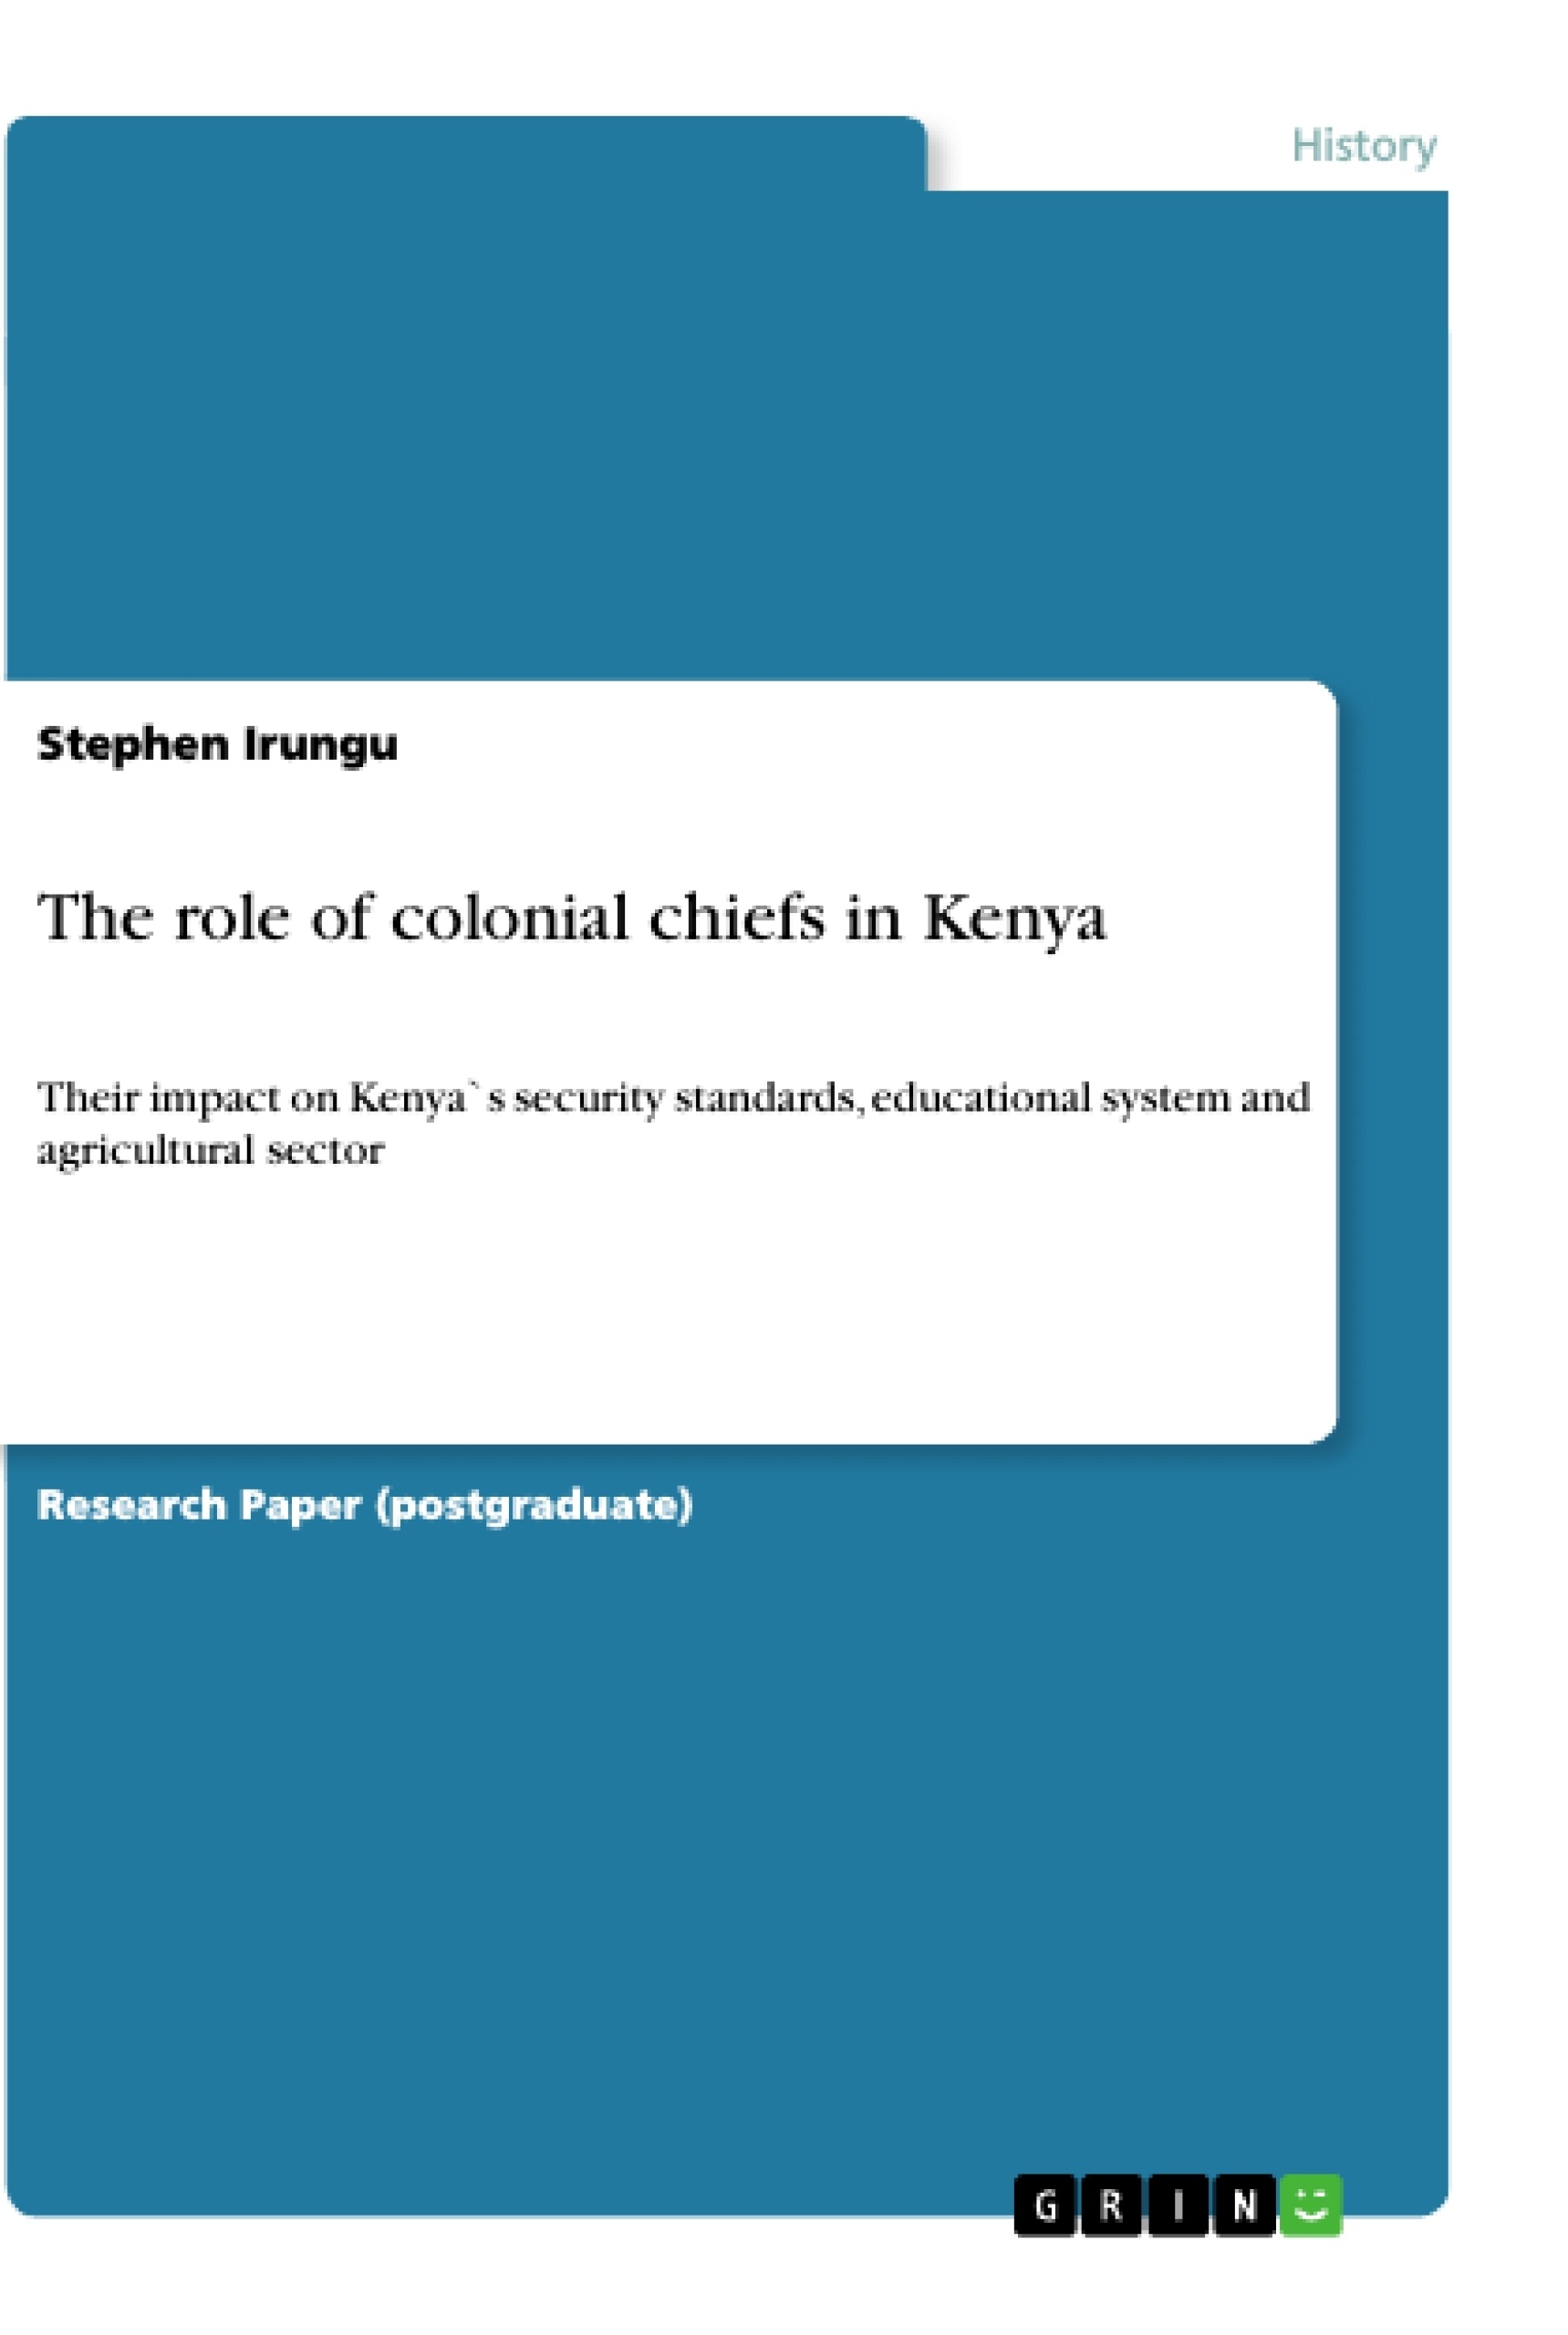 Title: The role of colonial chiefs in Kenya